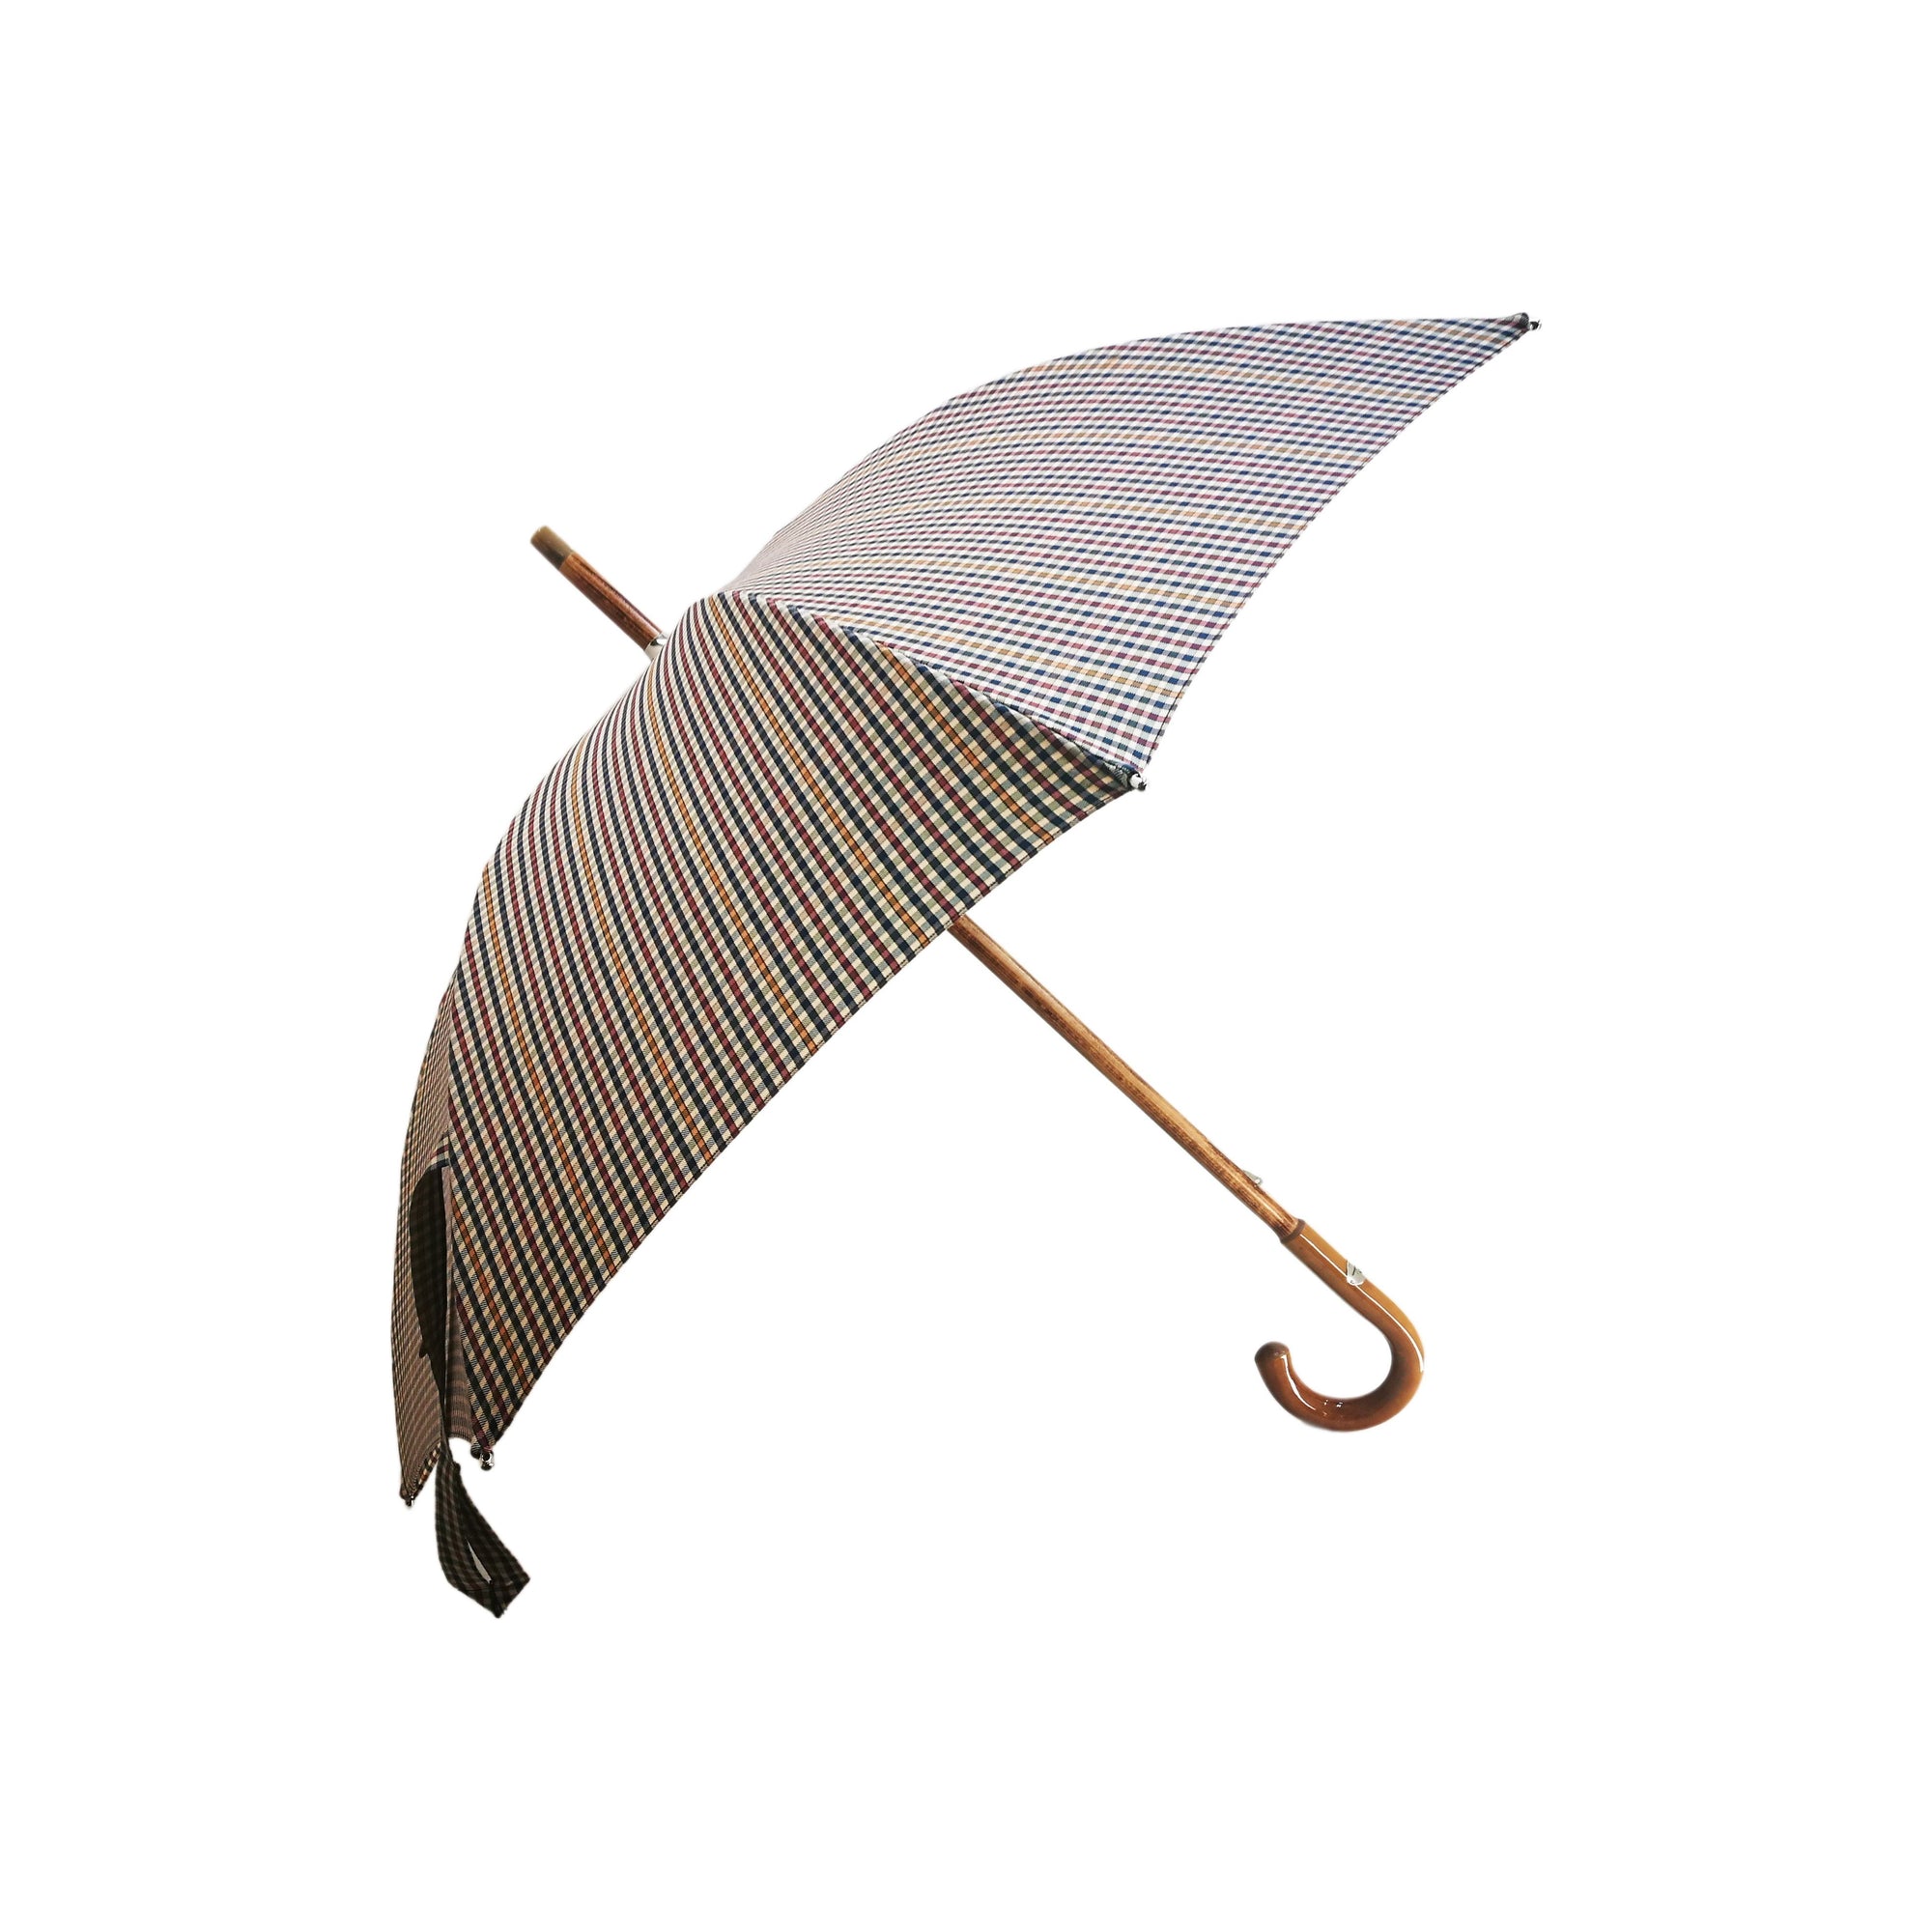 Cotton Check Umbrella with Malacca Root & Beech Wood